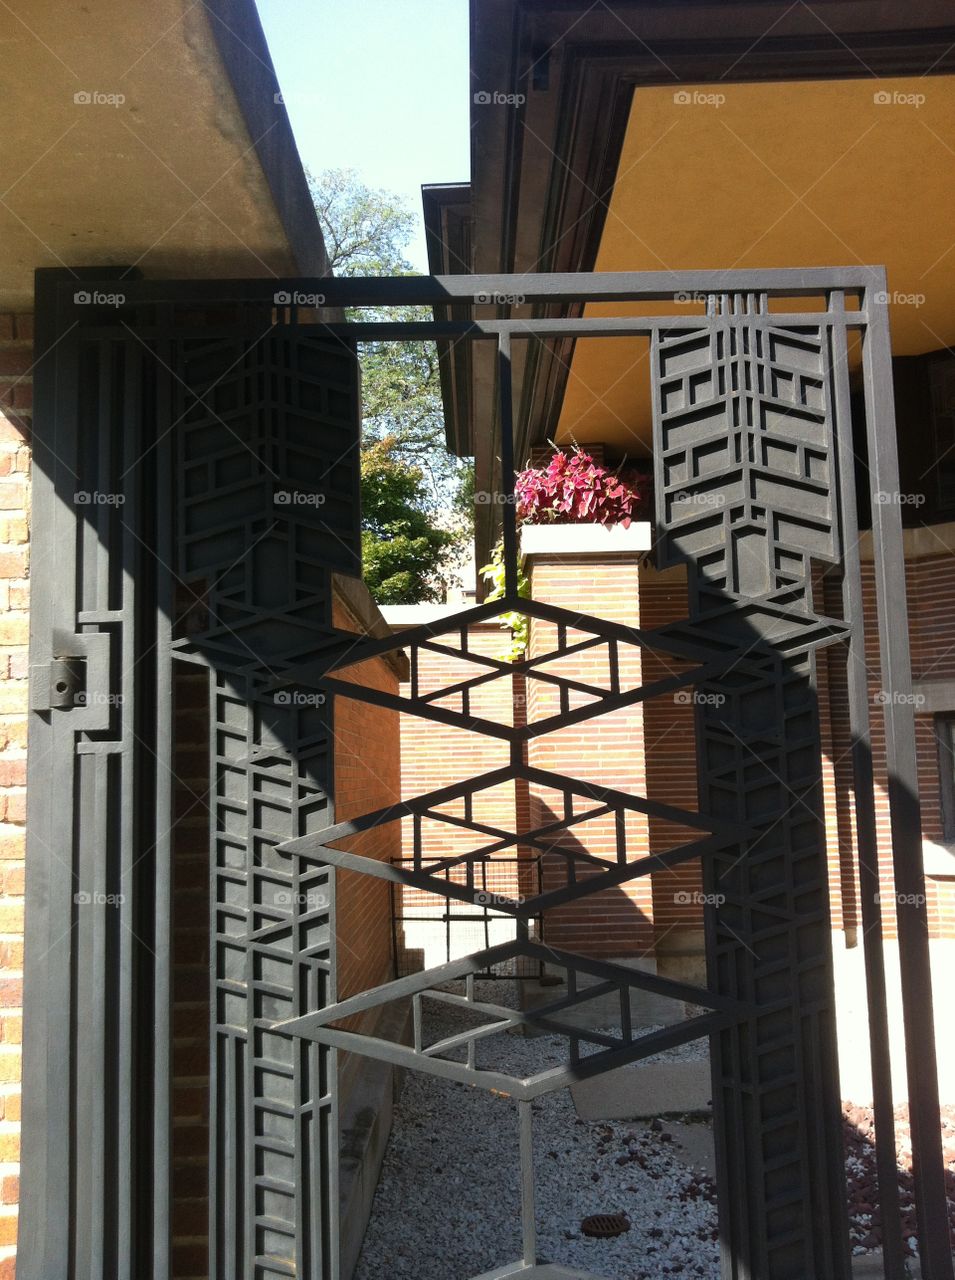 Entryway at Robie House